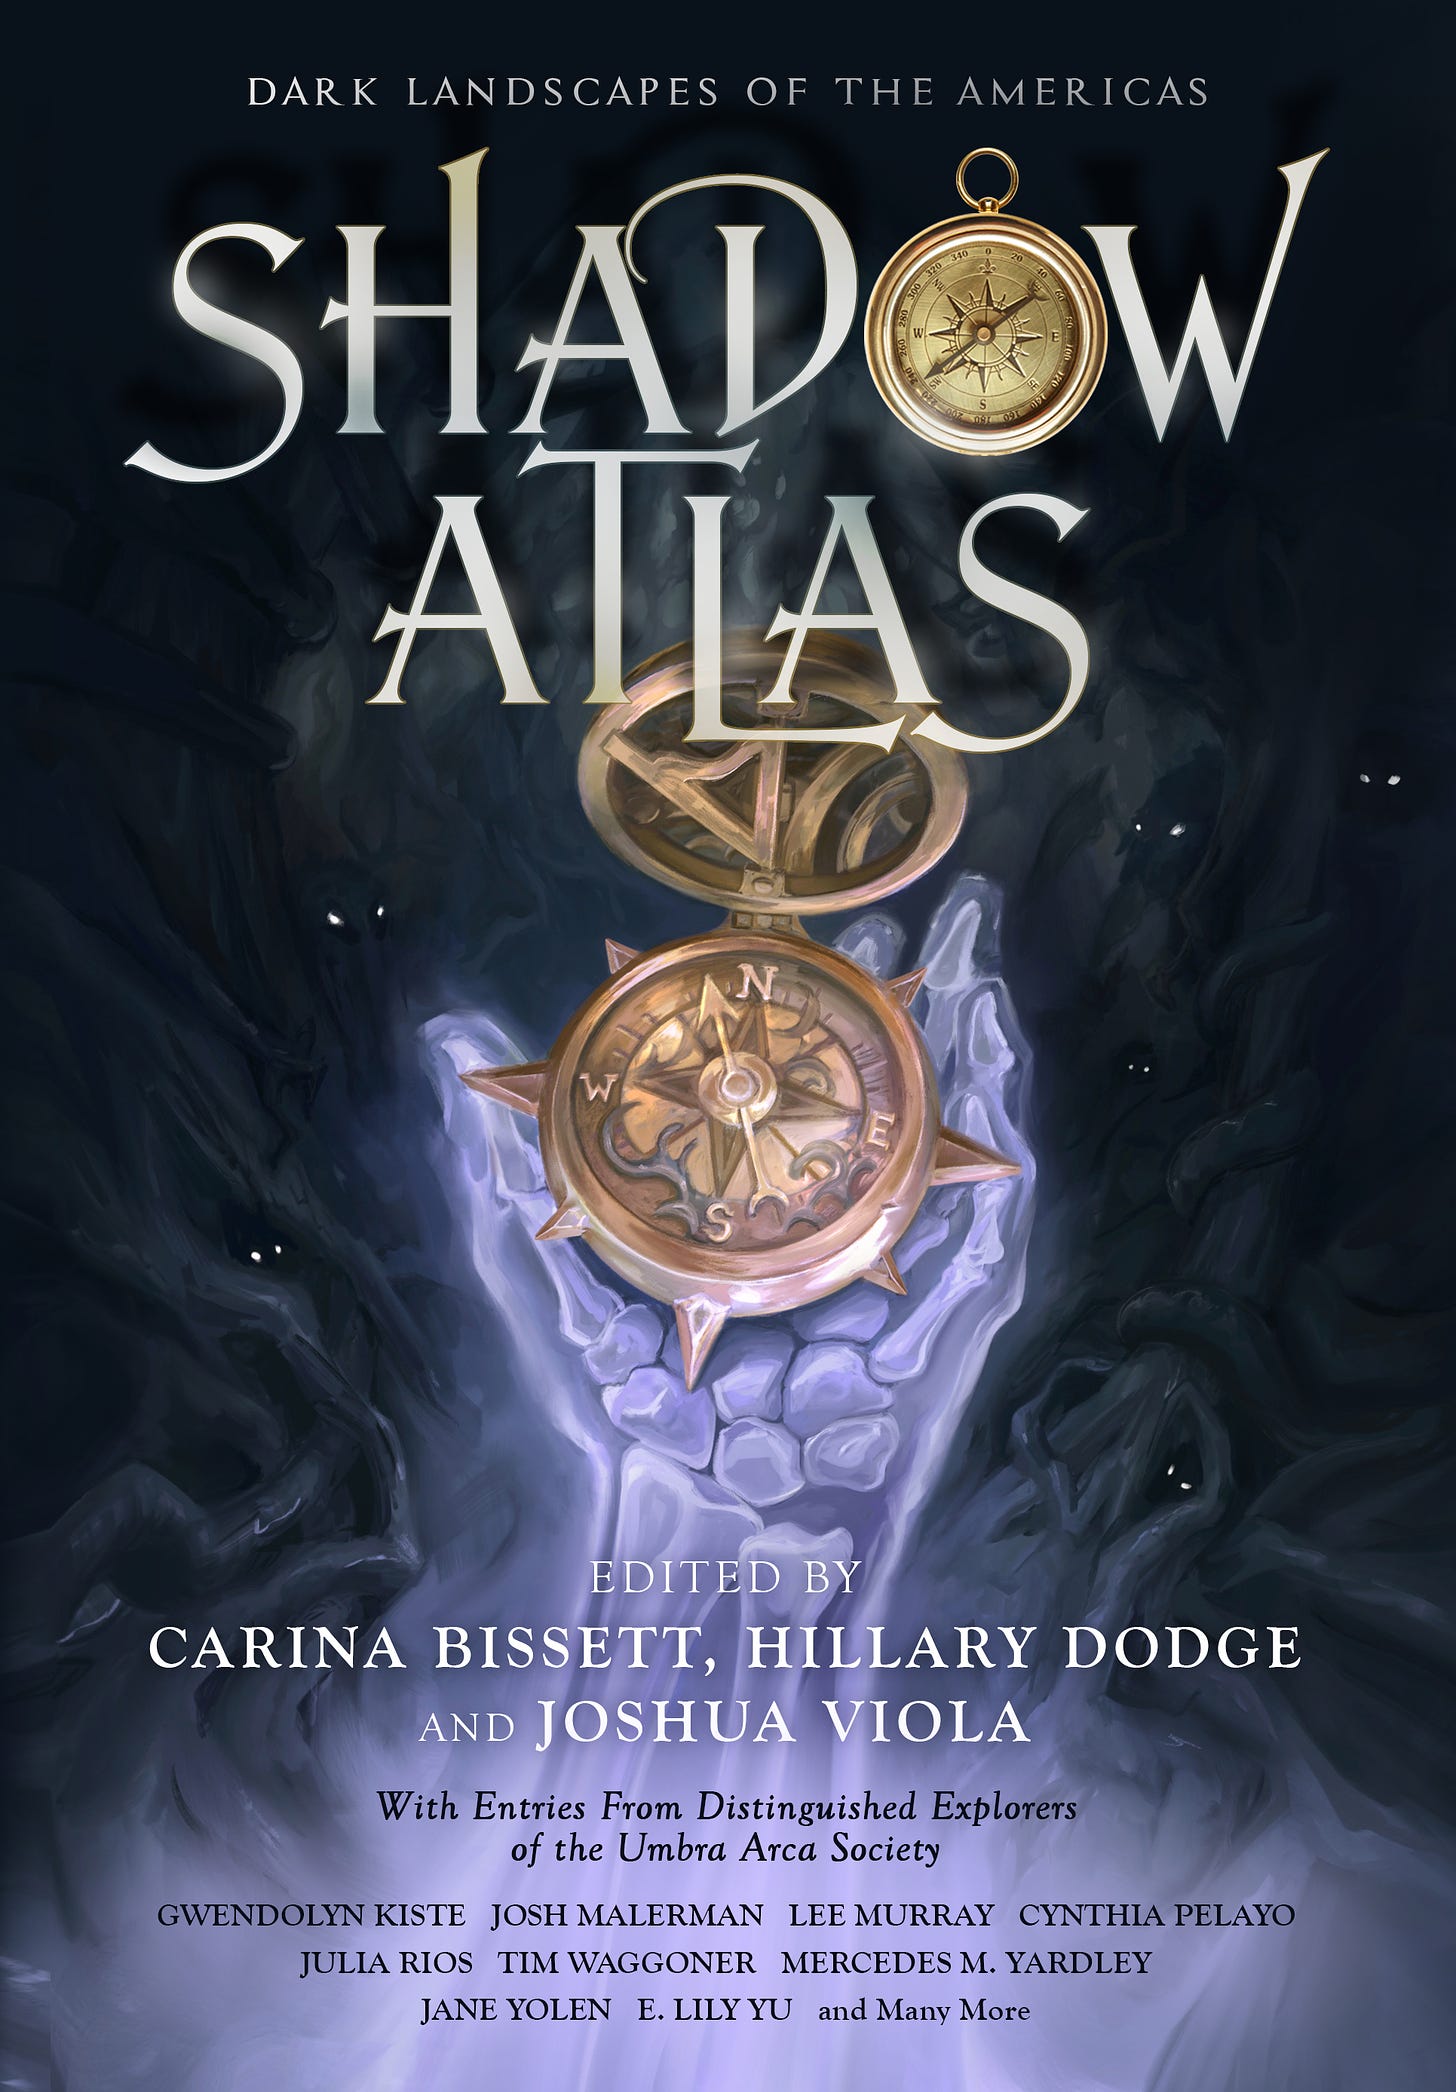 Front cover of Shadow Atlas: Dark Landscapes of the Americas, edited by Carina Bissett, Hillary Dodge, and Joshua Viola. The illustration shows a luminously lavender skeletal hand holding a golden compass against a background full of indistinct shadow figures peering out from the darkness. Below the editor credits is the text, &quot;With Entries From Distinguished Explorers of the Umbra Arca Society&quot; and below that appears a list of contributor names: Gwendolyn Kiste, Joshua Malerman, Lee Murray, Cynthia Pelayo, Julia Rios, Tim Waggoner, Mercedes M. Yardley, Jane Yolen, E. Lily Yu, and Many More